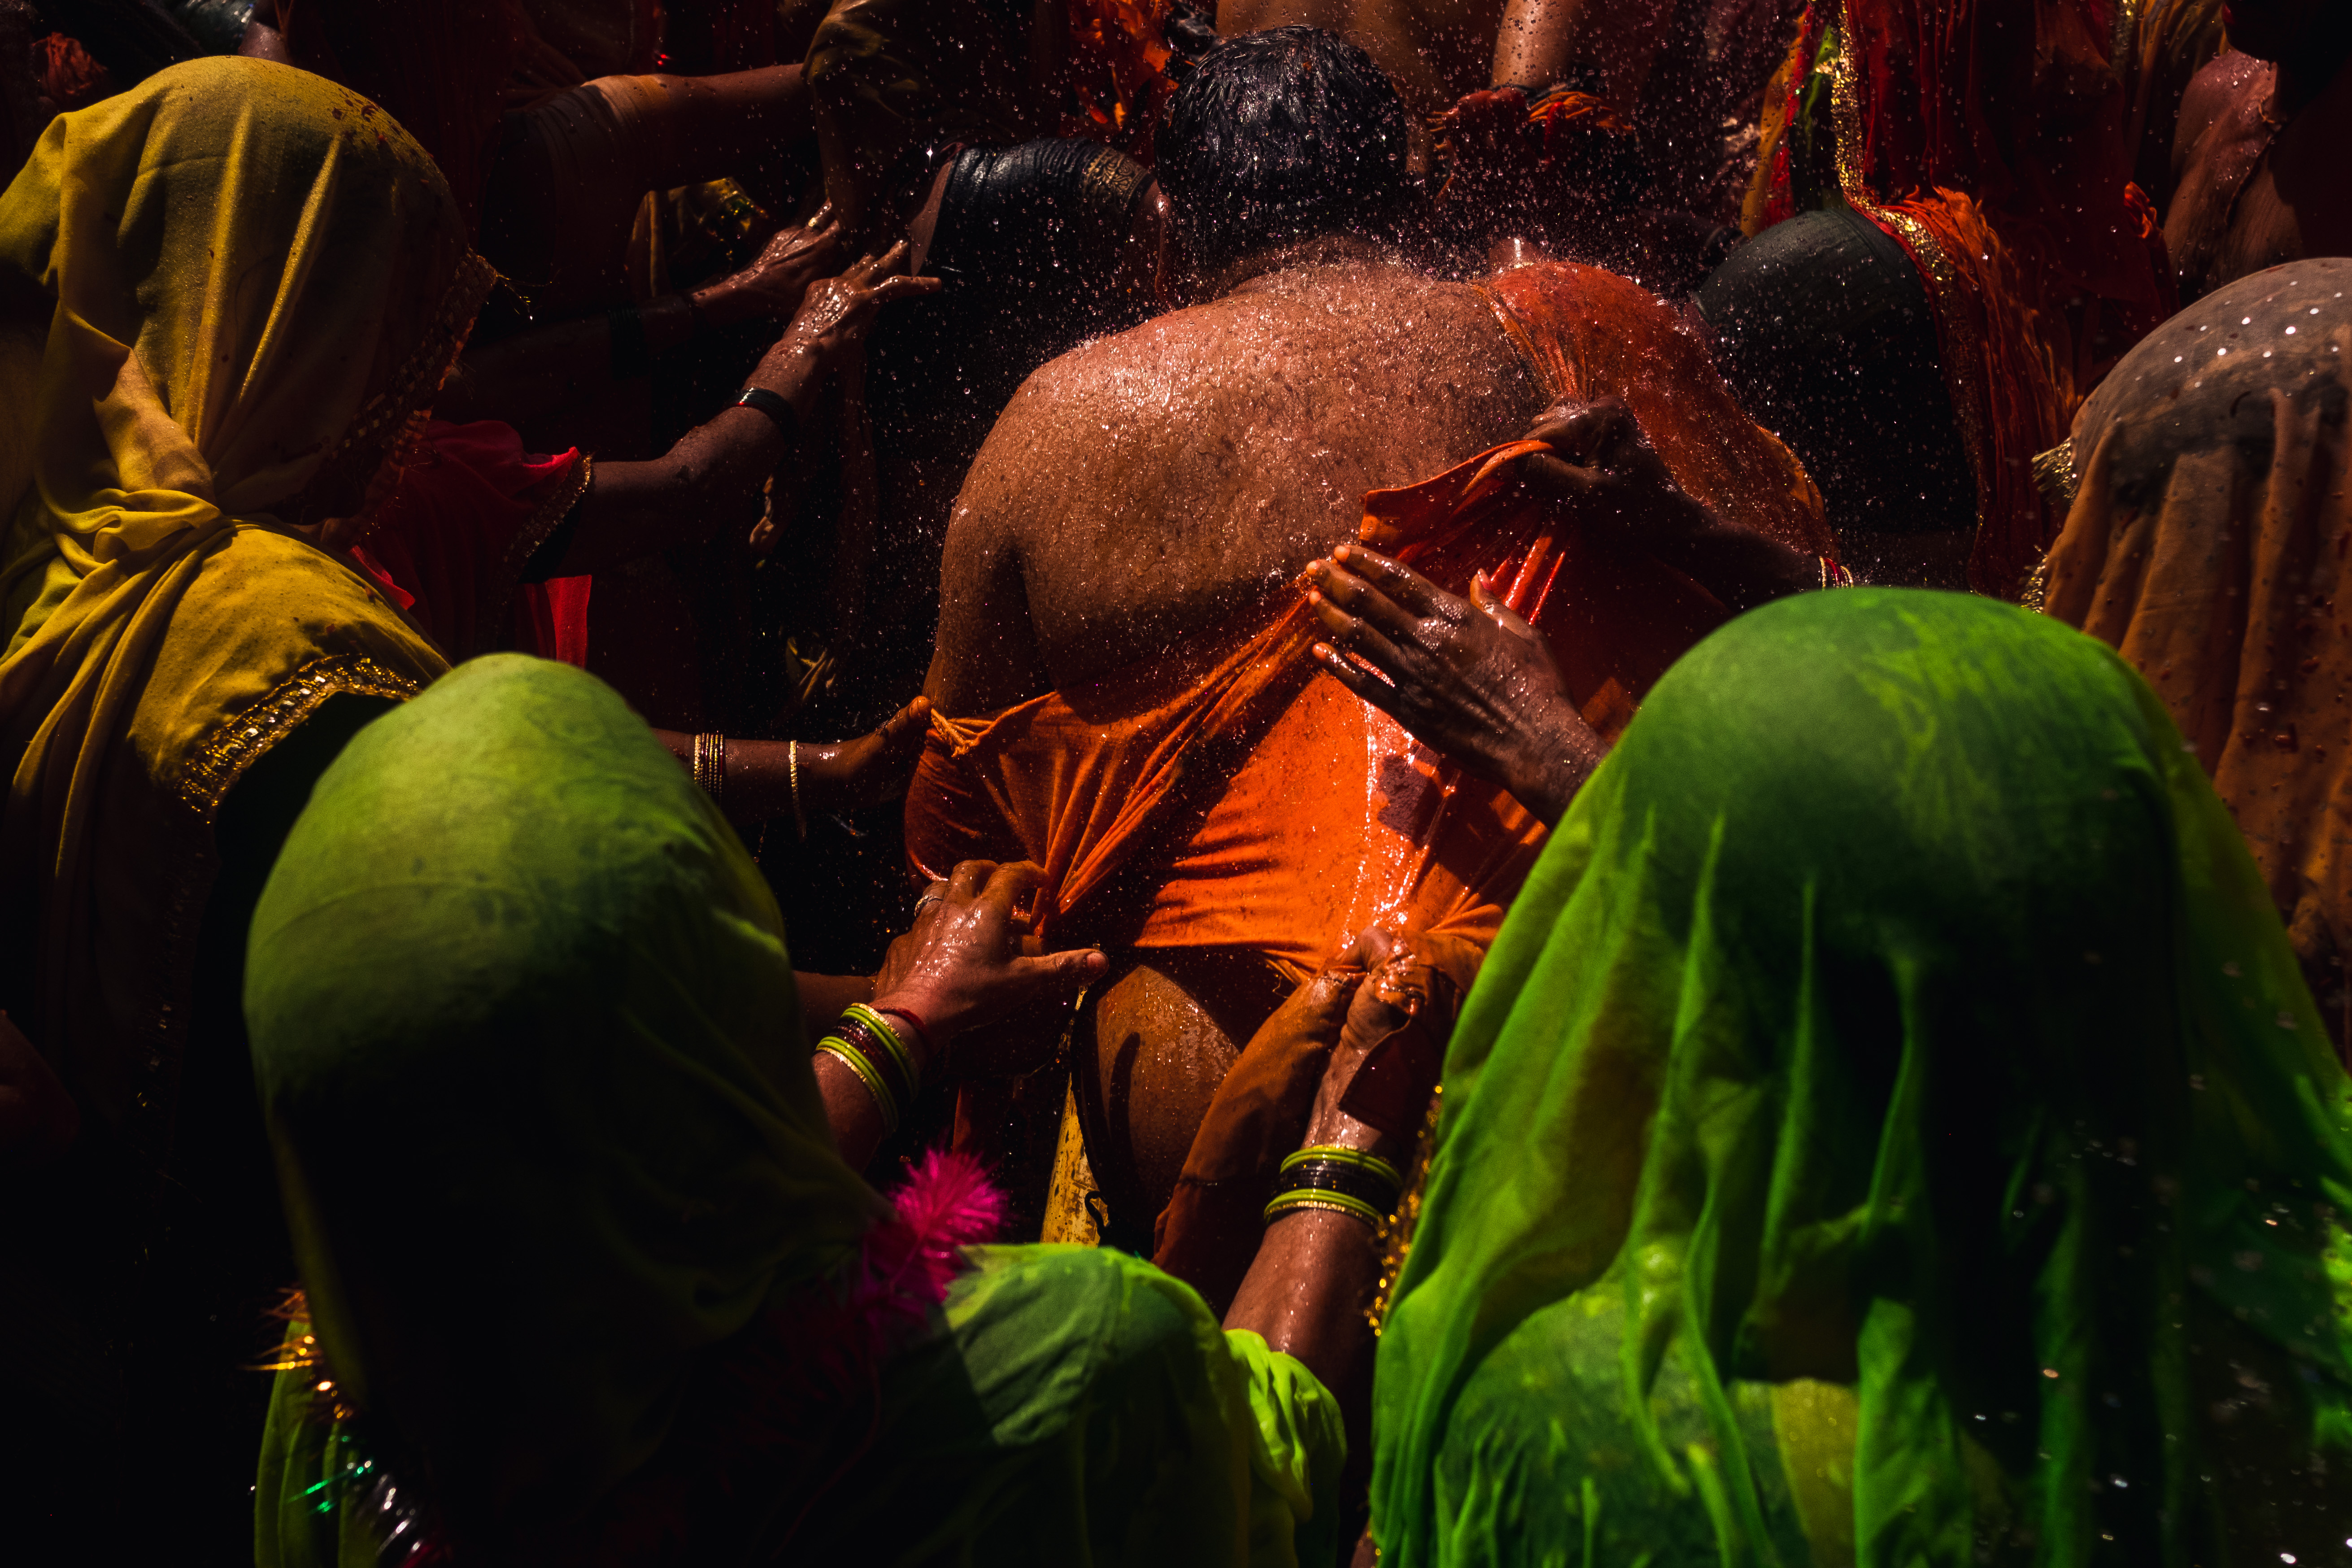 India Street Photography During Holi Festival. man gets his wet shirt ripped off by woman. Images by Jason Vinson